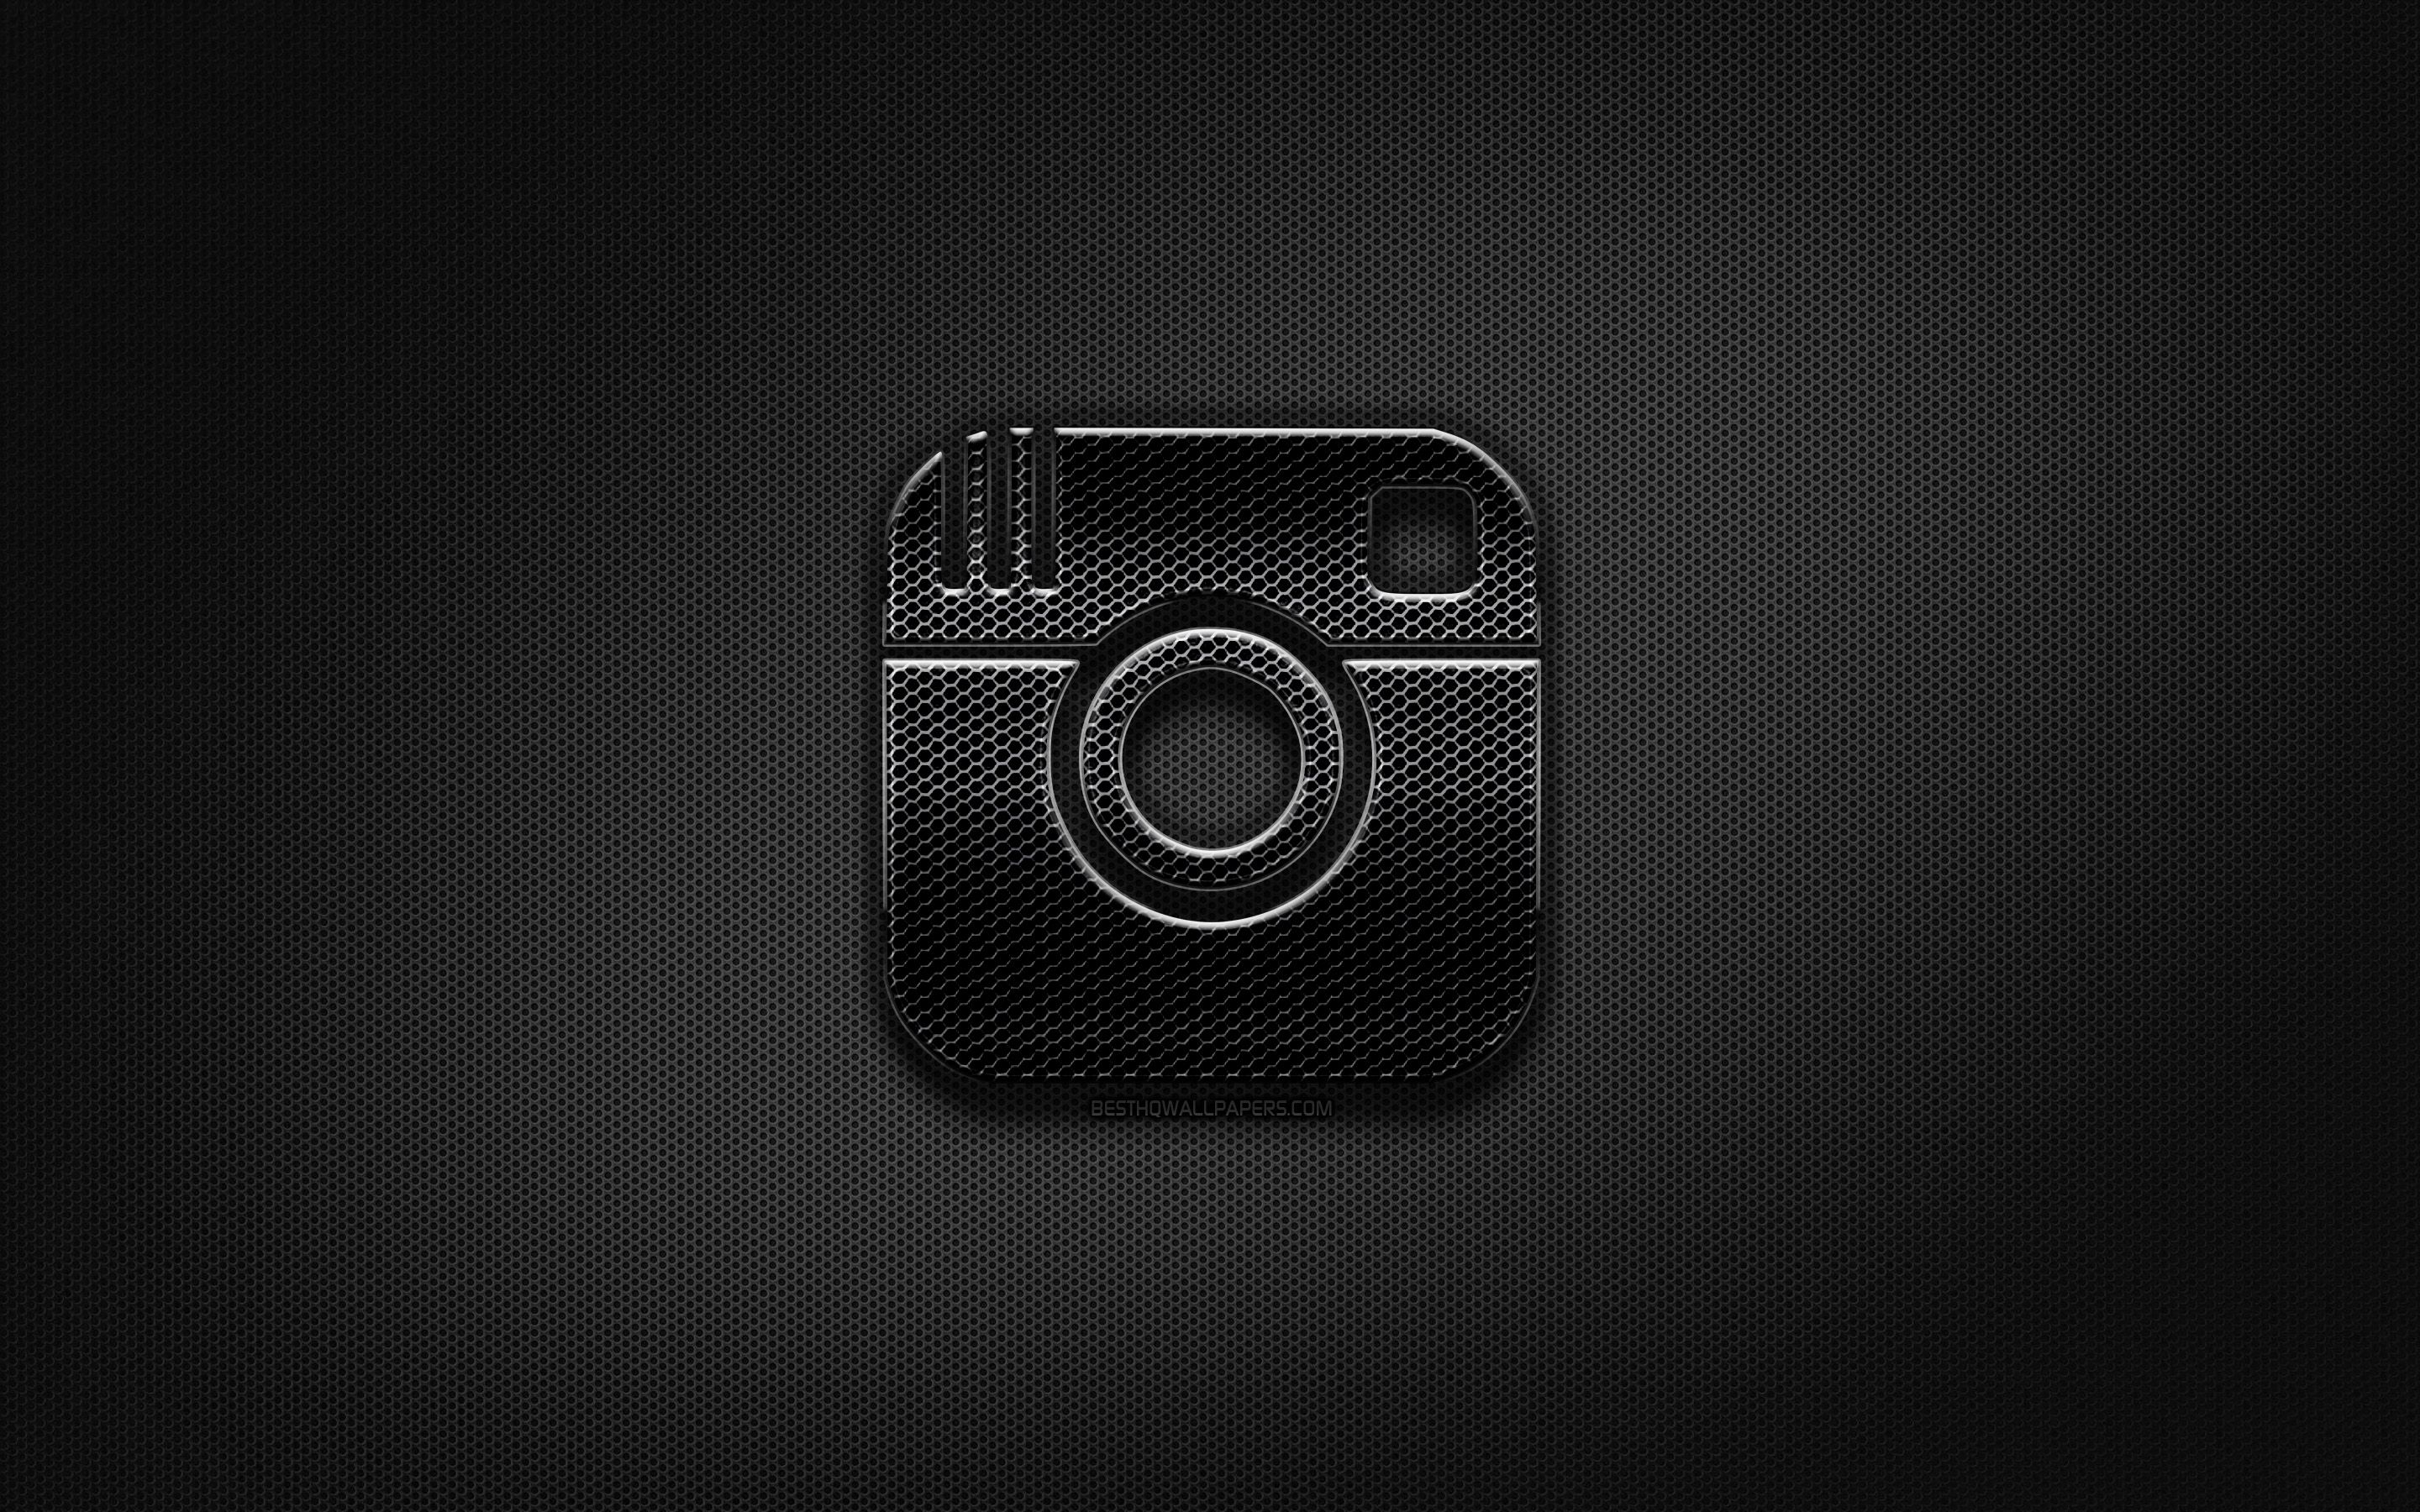 Instagram Black And White Wallpapers - Wallpaper Cave